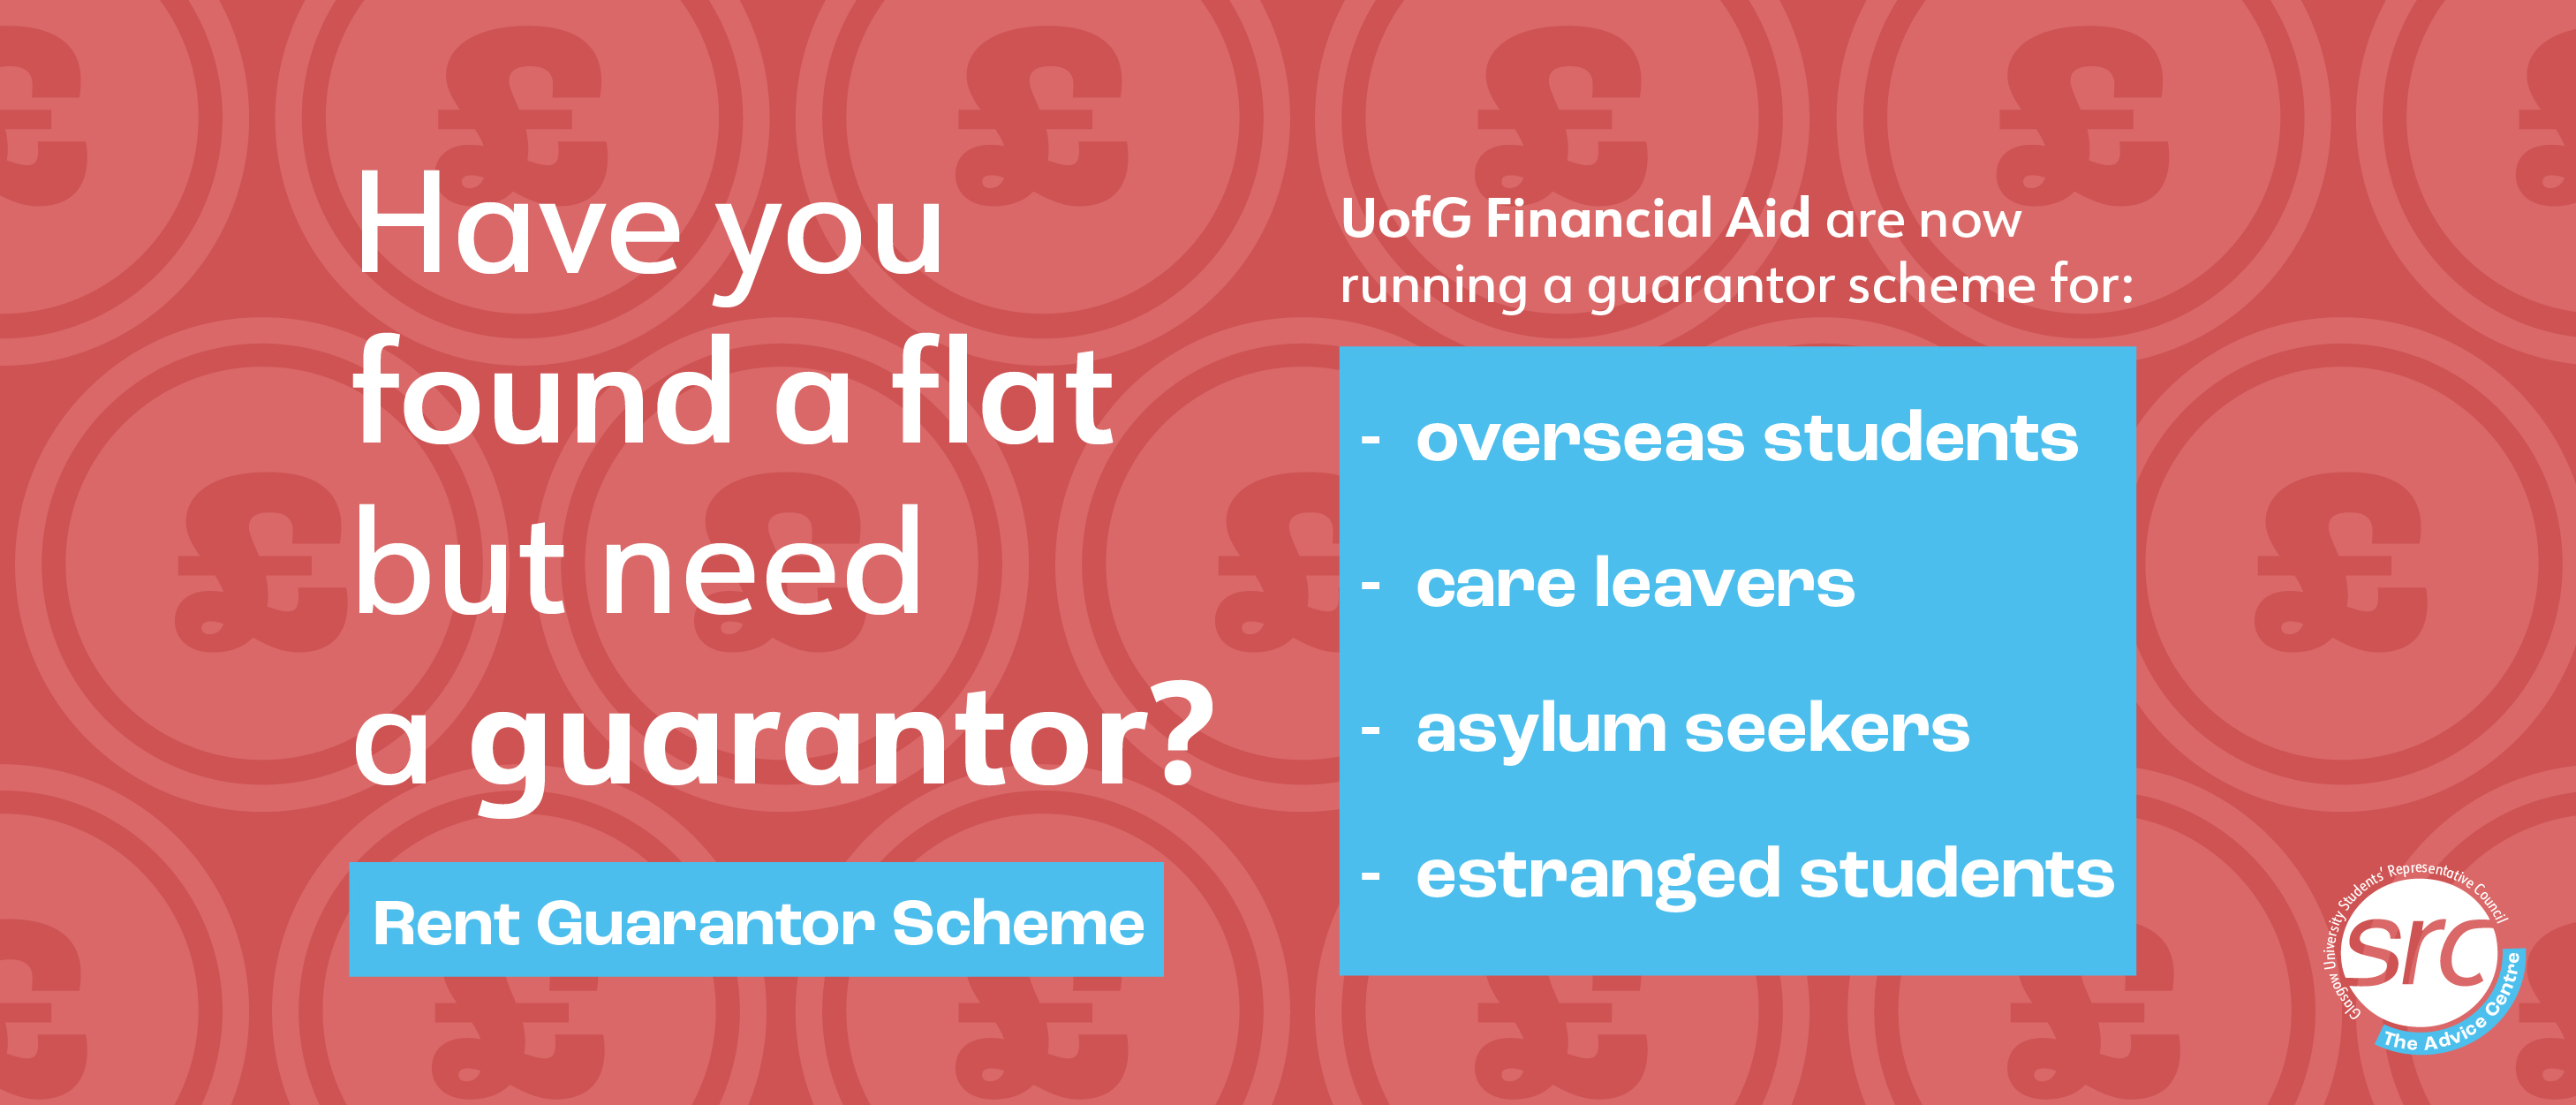 Graphic promoting the SRC/University Financial Aid Flat Guarantor scheme, which allows students from overseas or who are estranged to have guarantors for flats